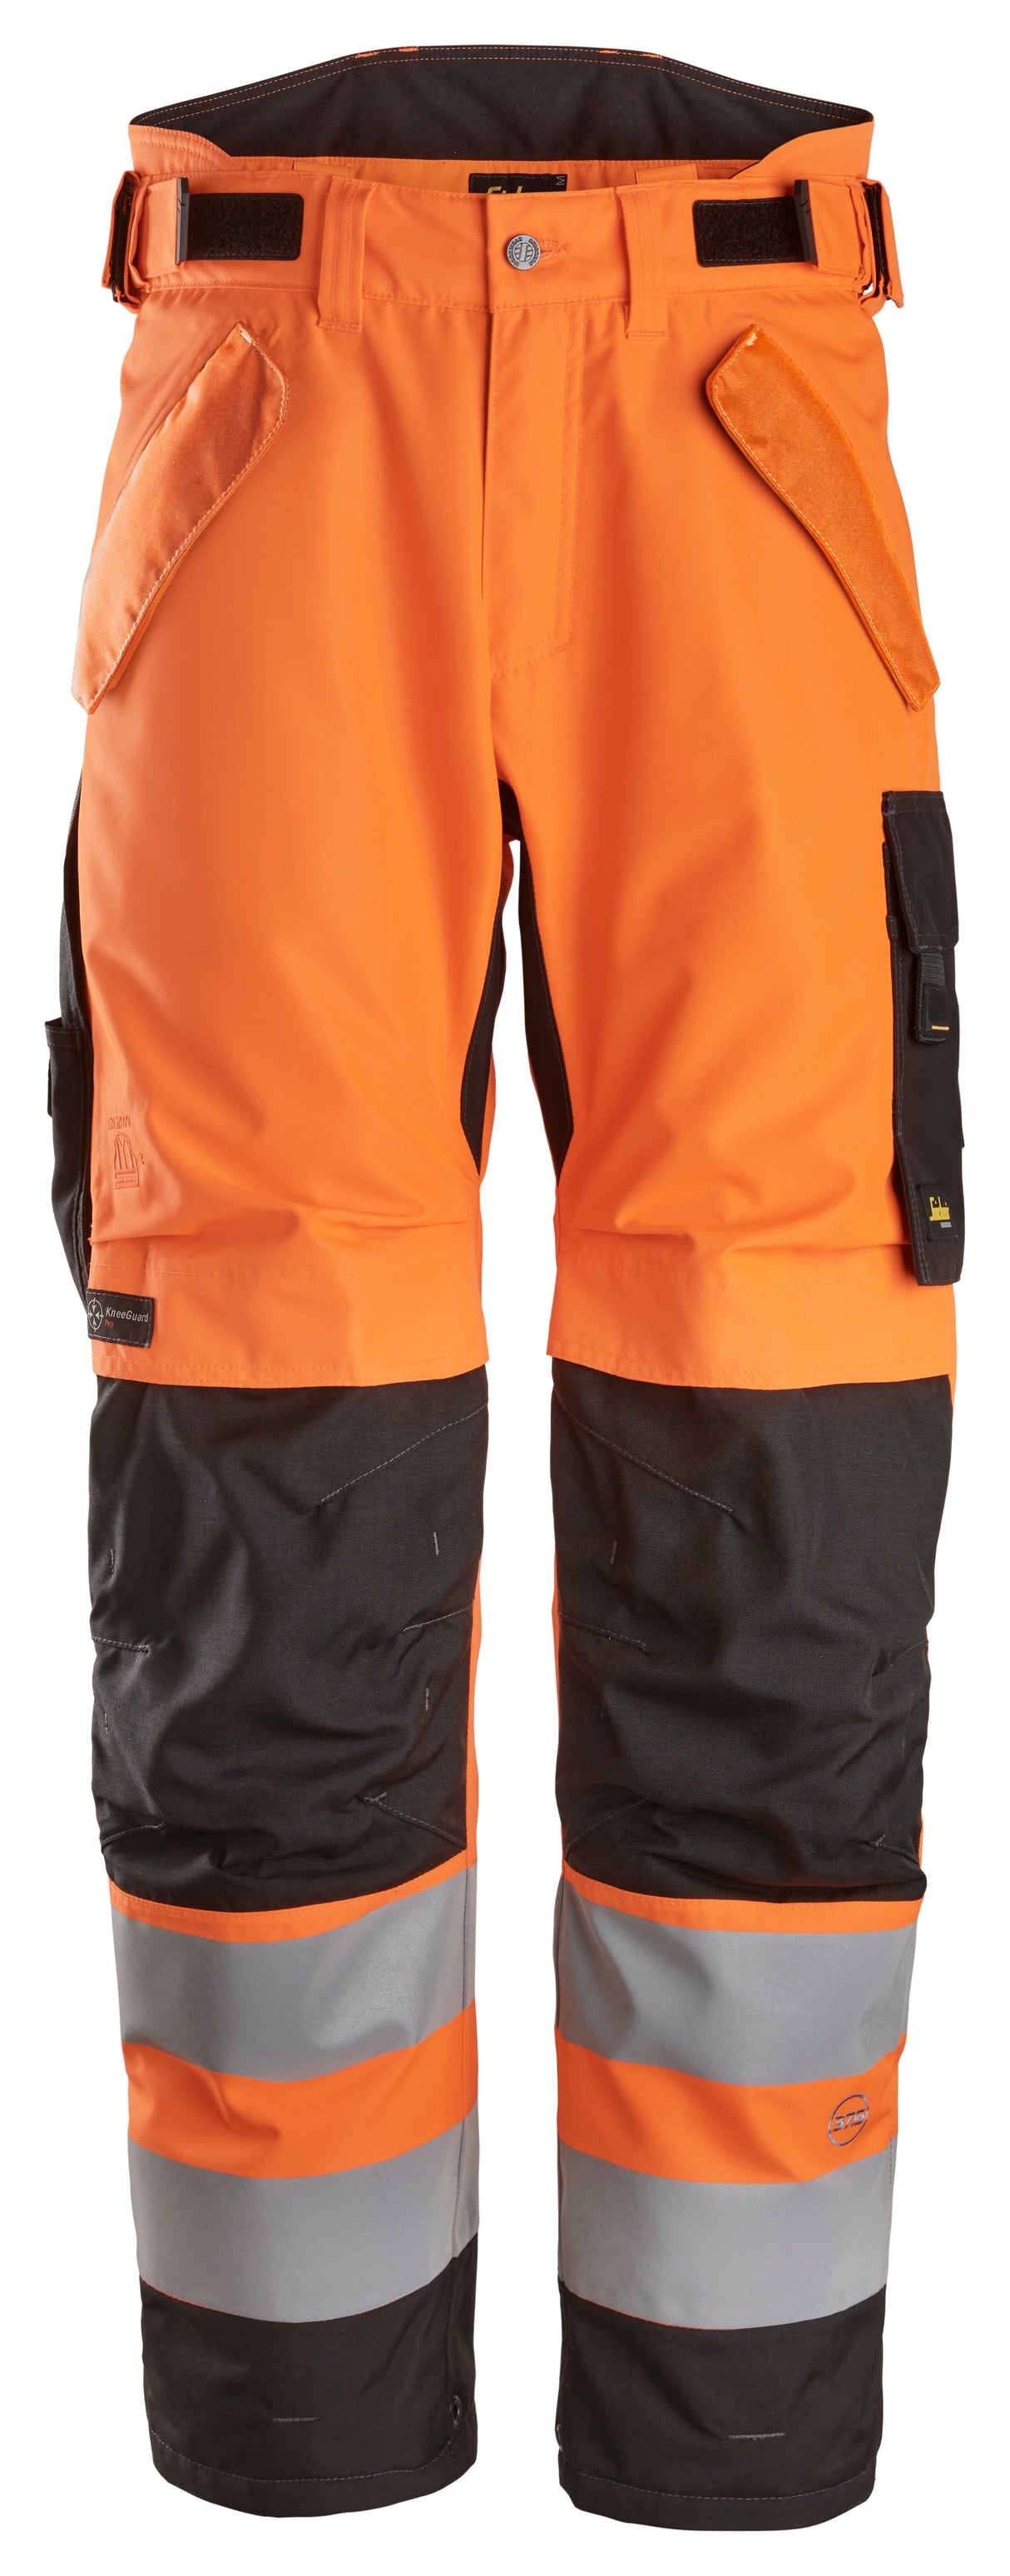 Snickers 6630 Hi-vis Class 2 Waterproof 2-Layer Trousers